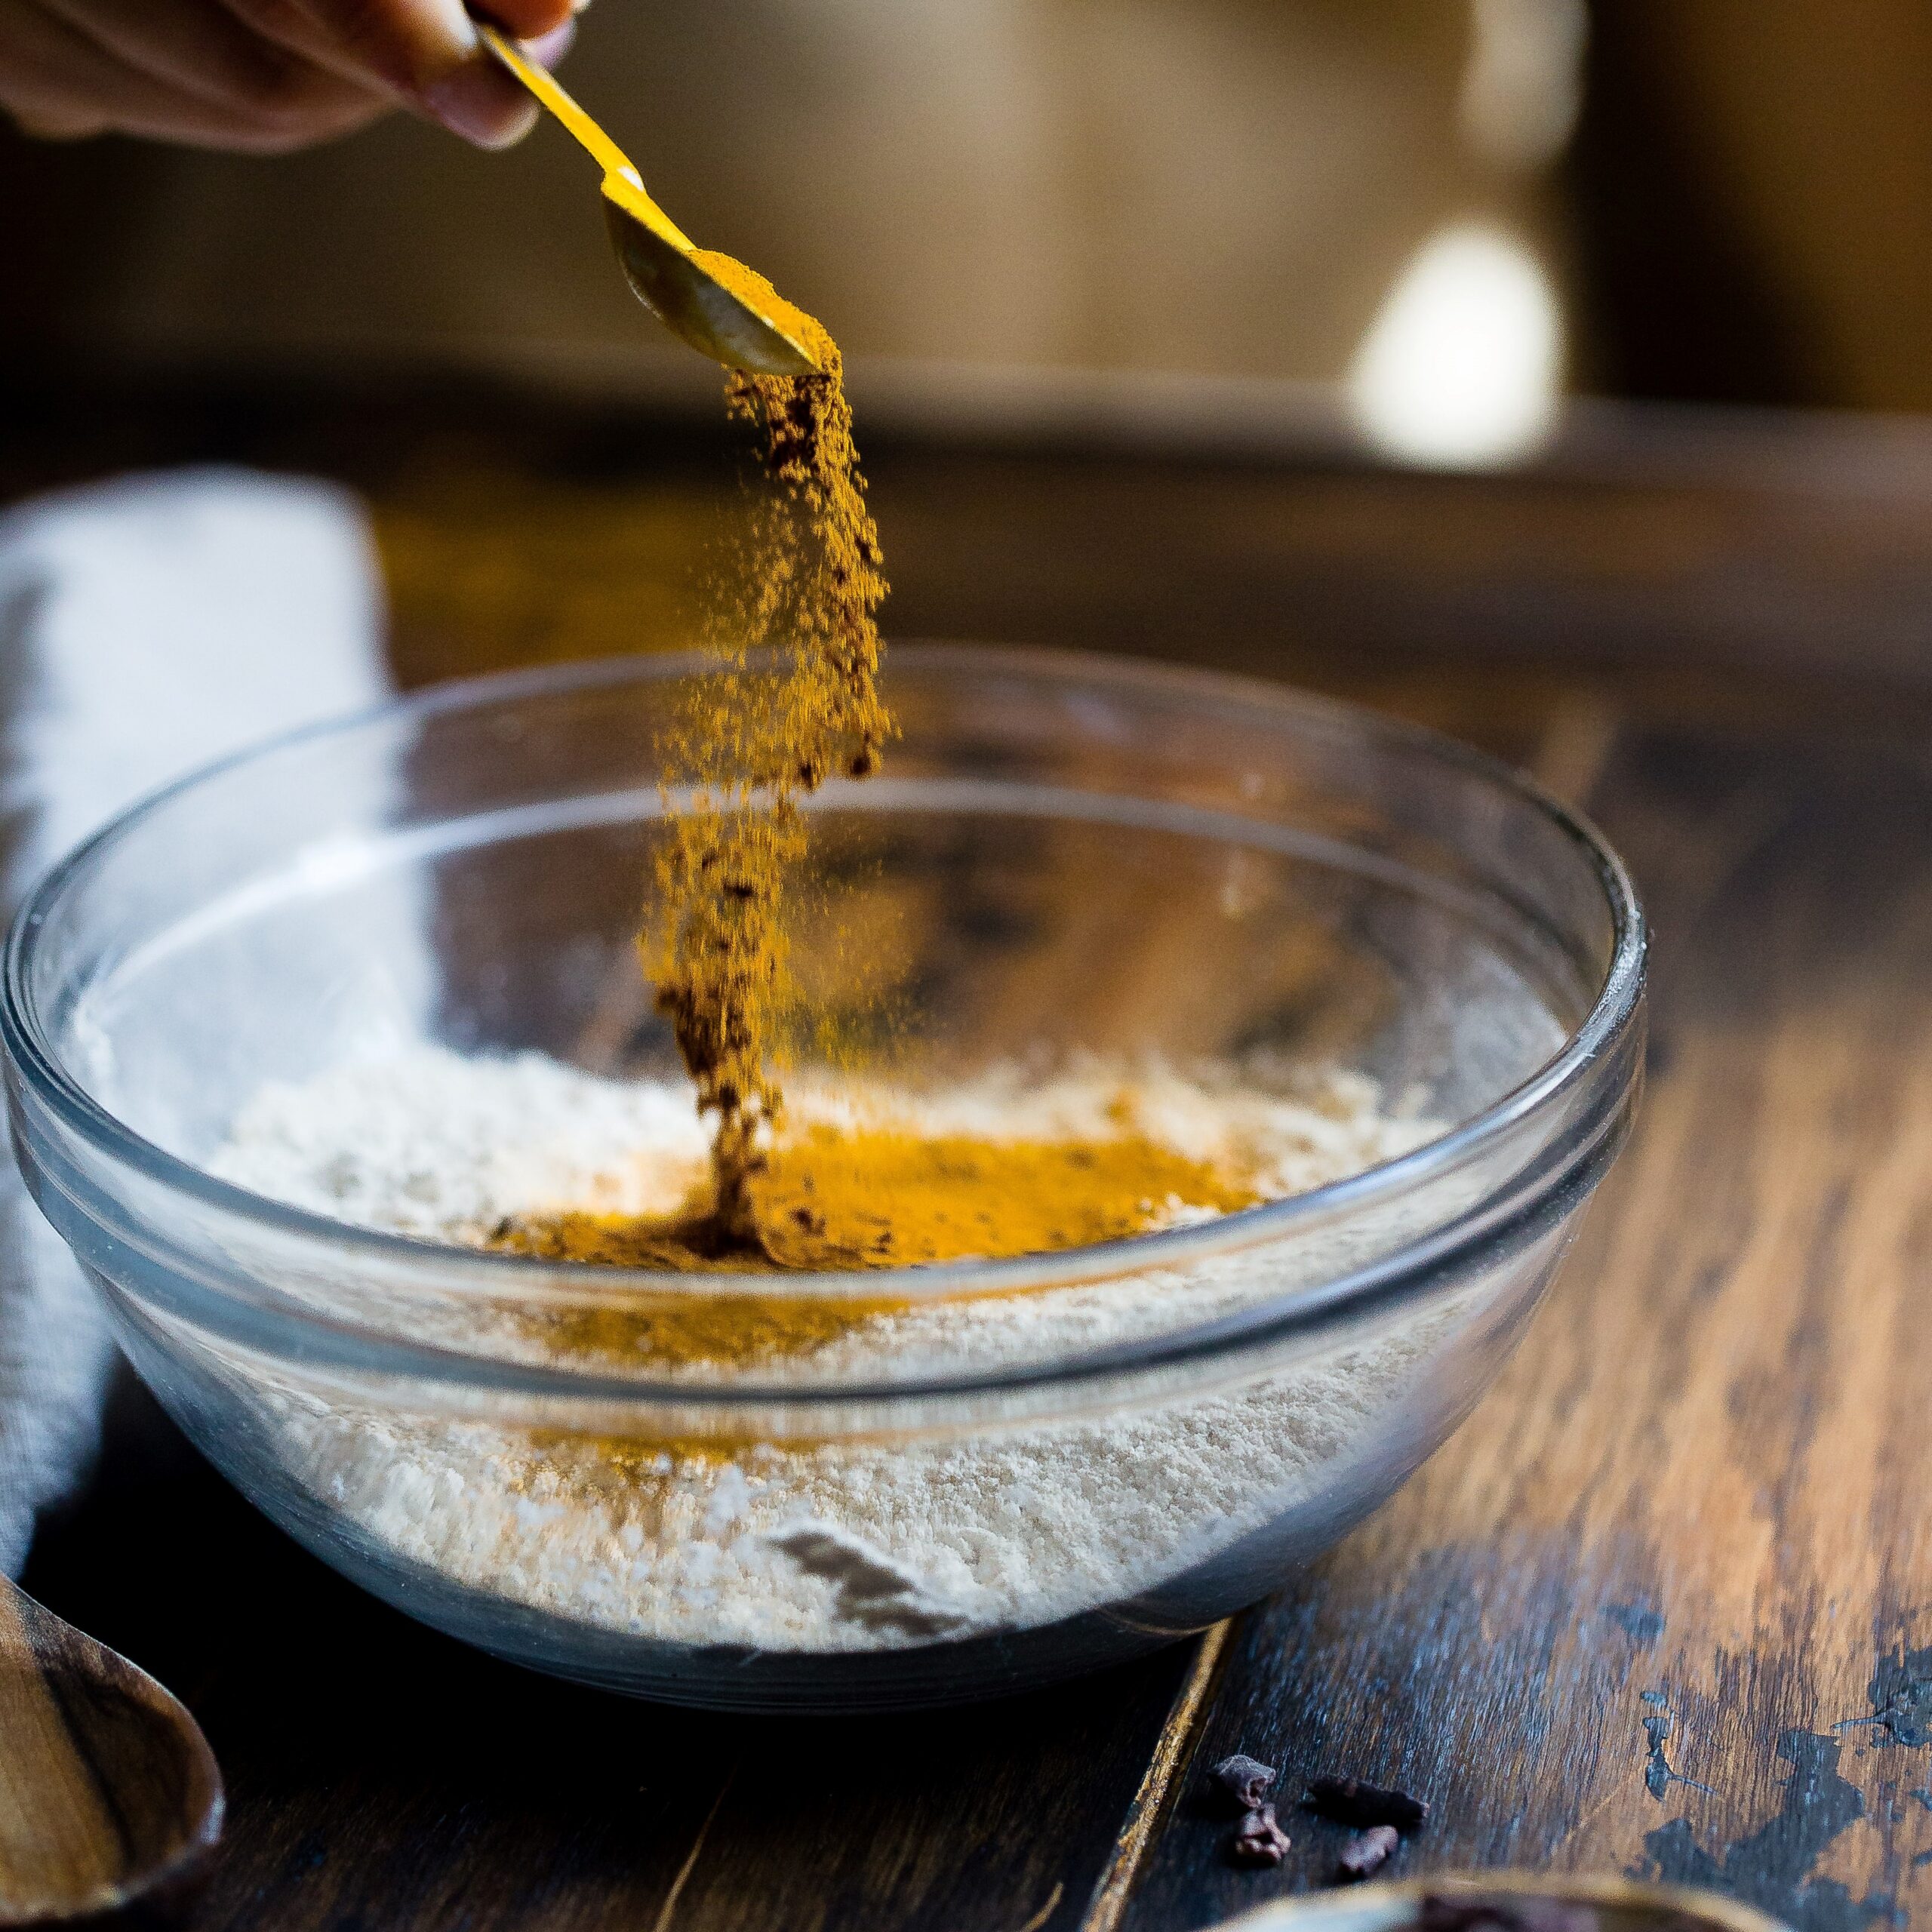 a hand with spoon sprinkling turmeric into a glass bowl of ground almonds sitting on a wooden surface